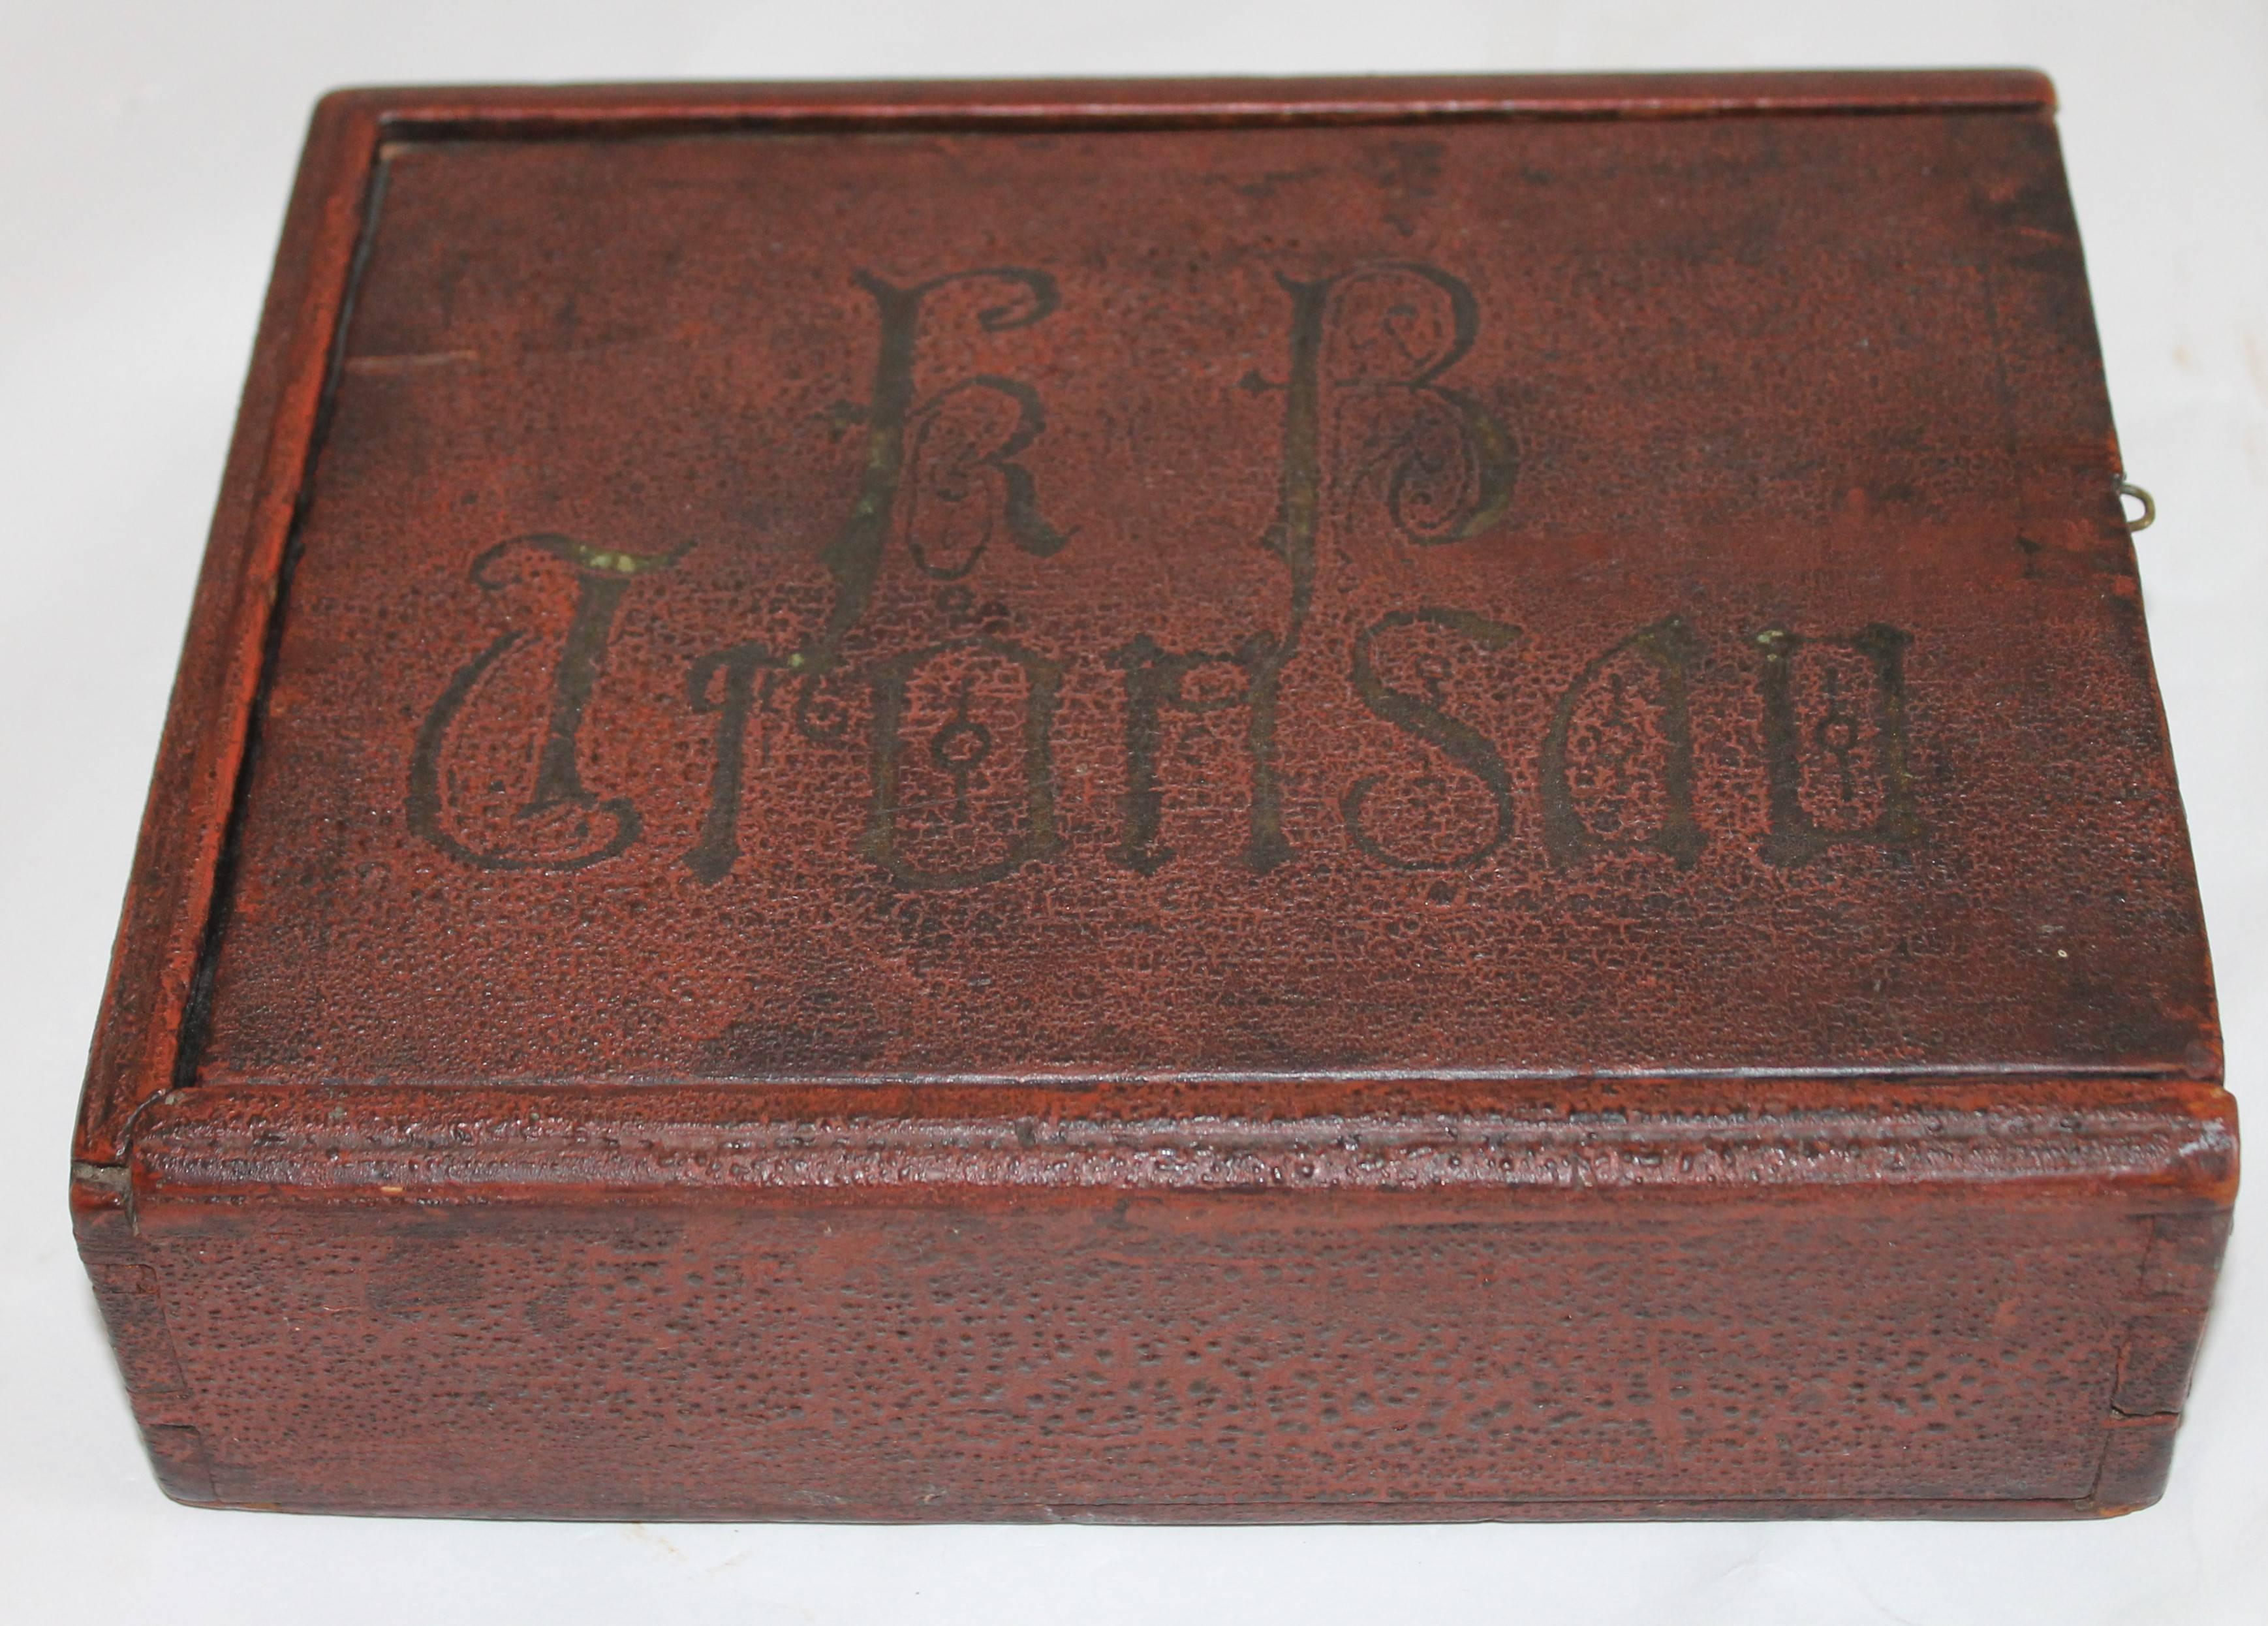 This fine handmade and dovetailed 1780-1800s red painted candle box is in fine as found condition. It is from Lancaster County, Pennsylvania in original undisturbed red crazed surface. There is gilded letters on the top that are somewhat worn and